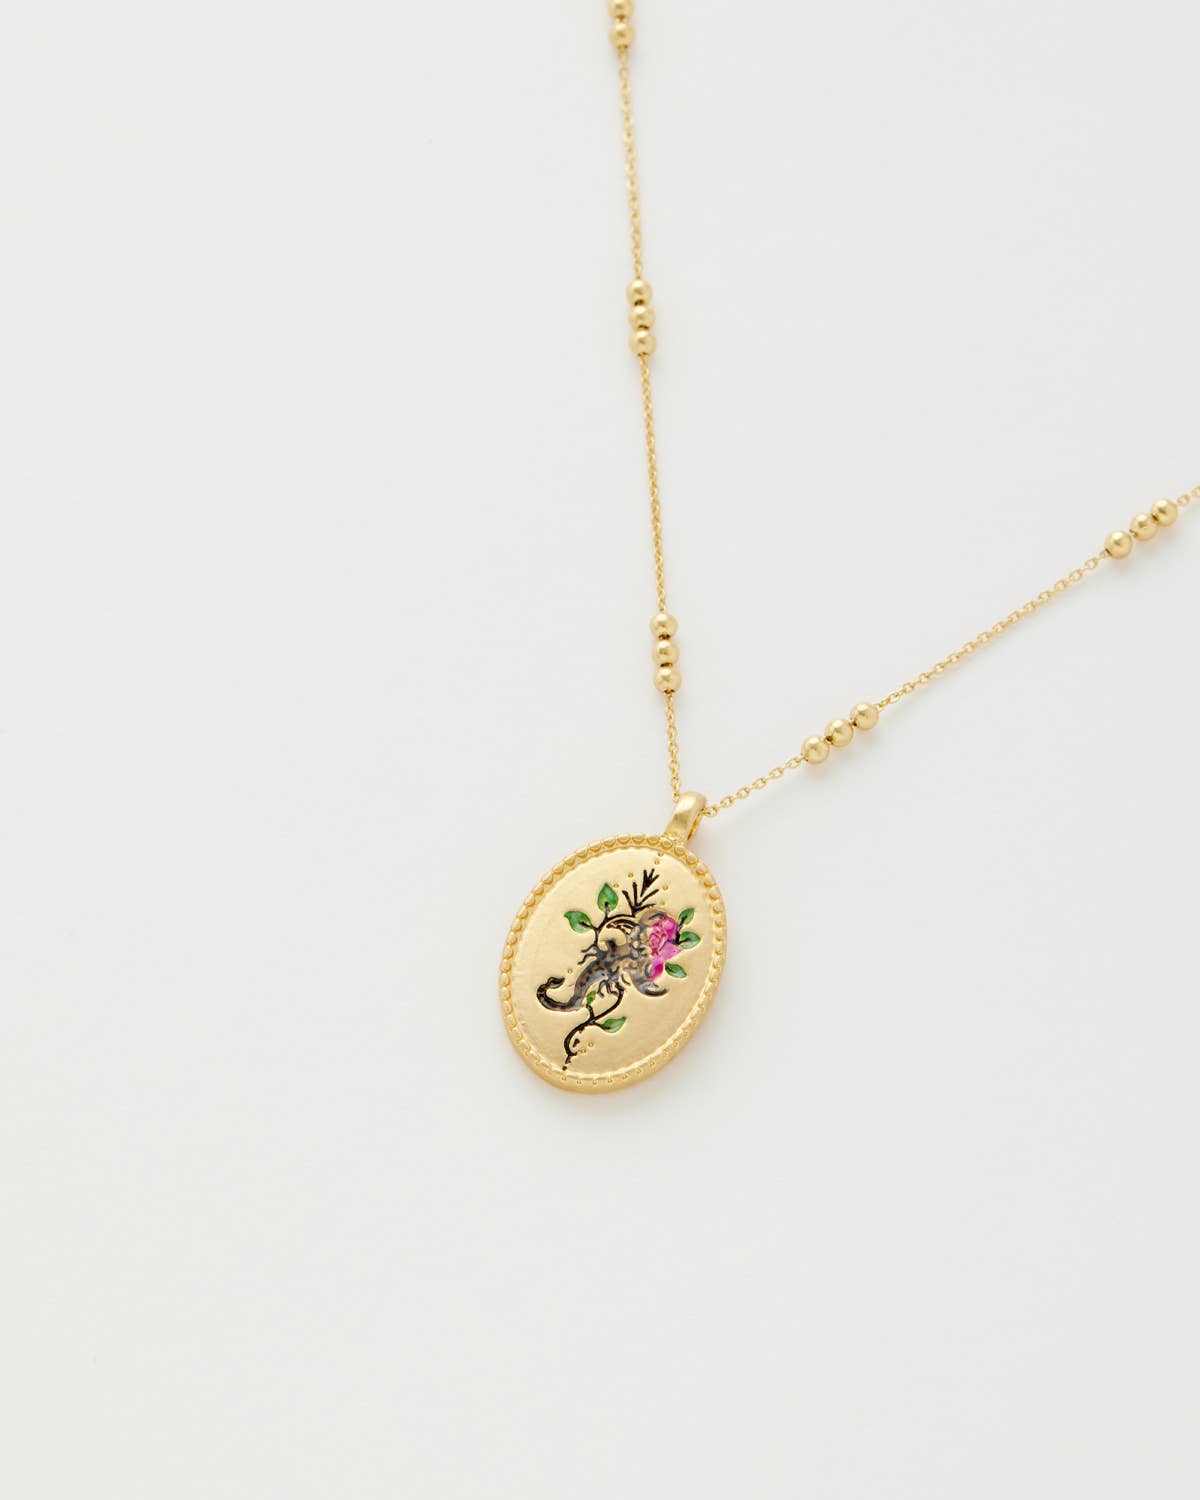 Zodiac Necklace - Scorpio - Out of the Blue